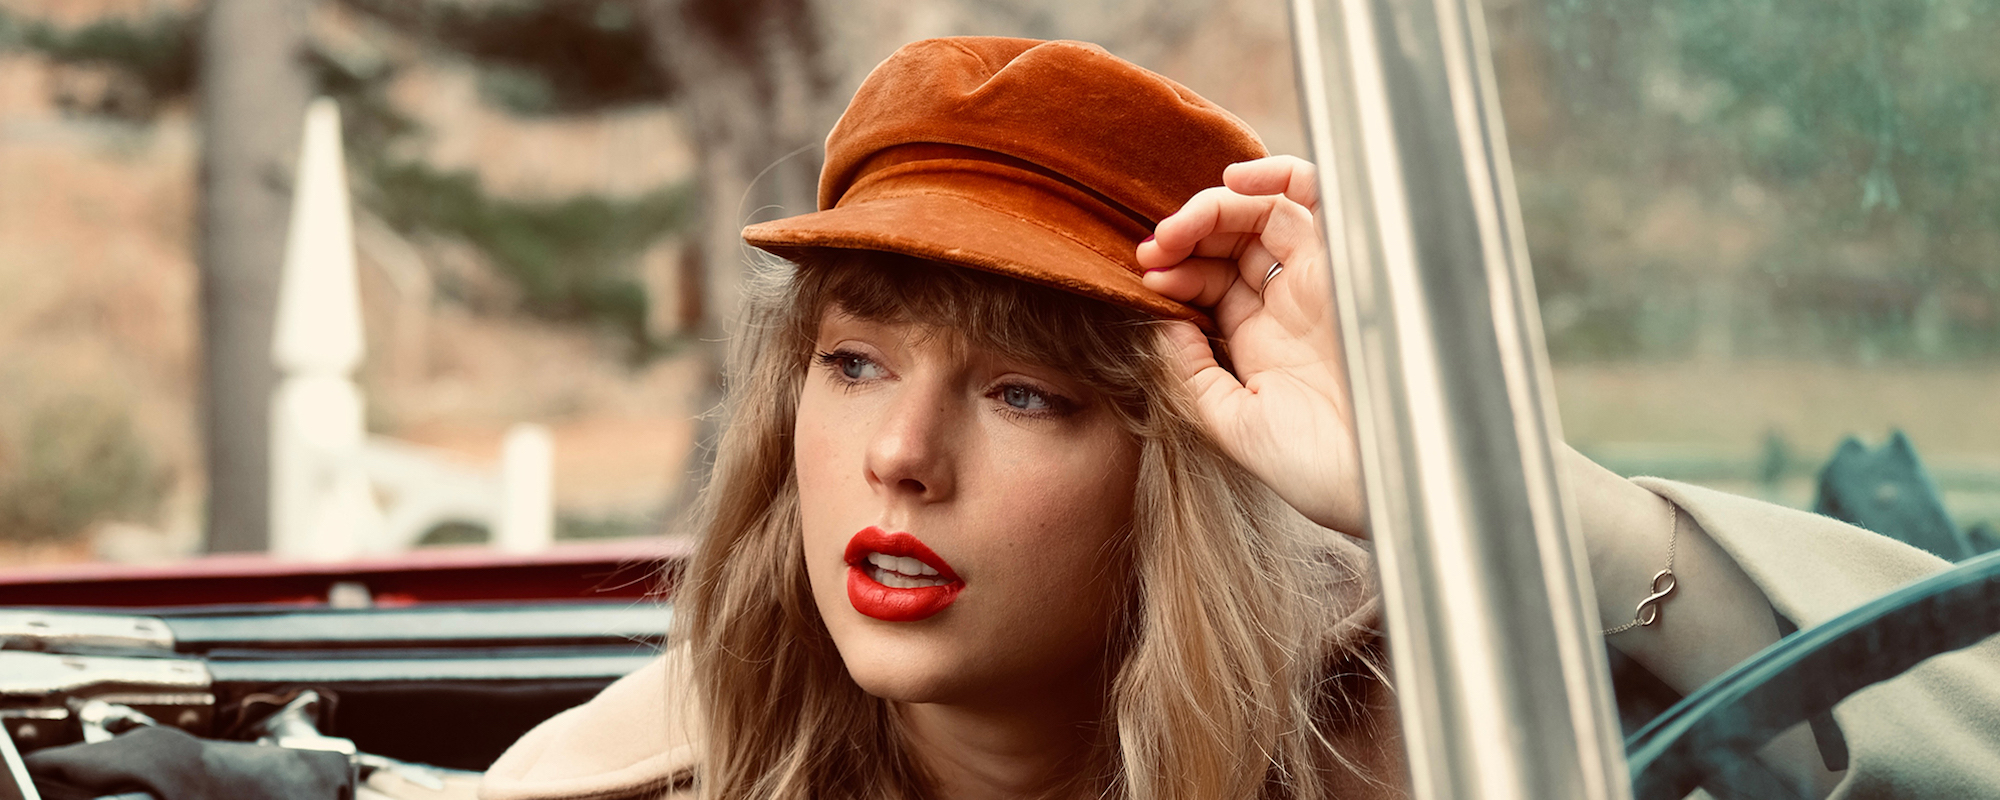 Damon Albarn Apologizes for Attempting to Discredit Taylor Swift’s Songwriting